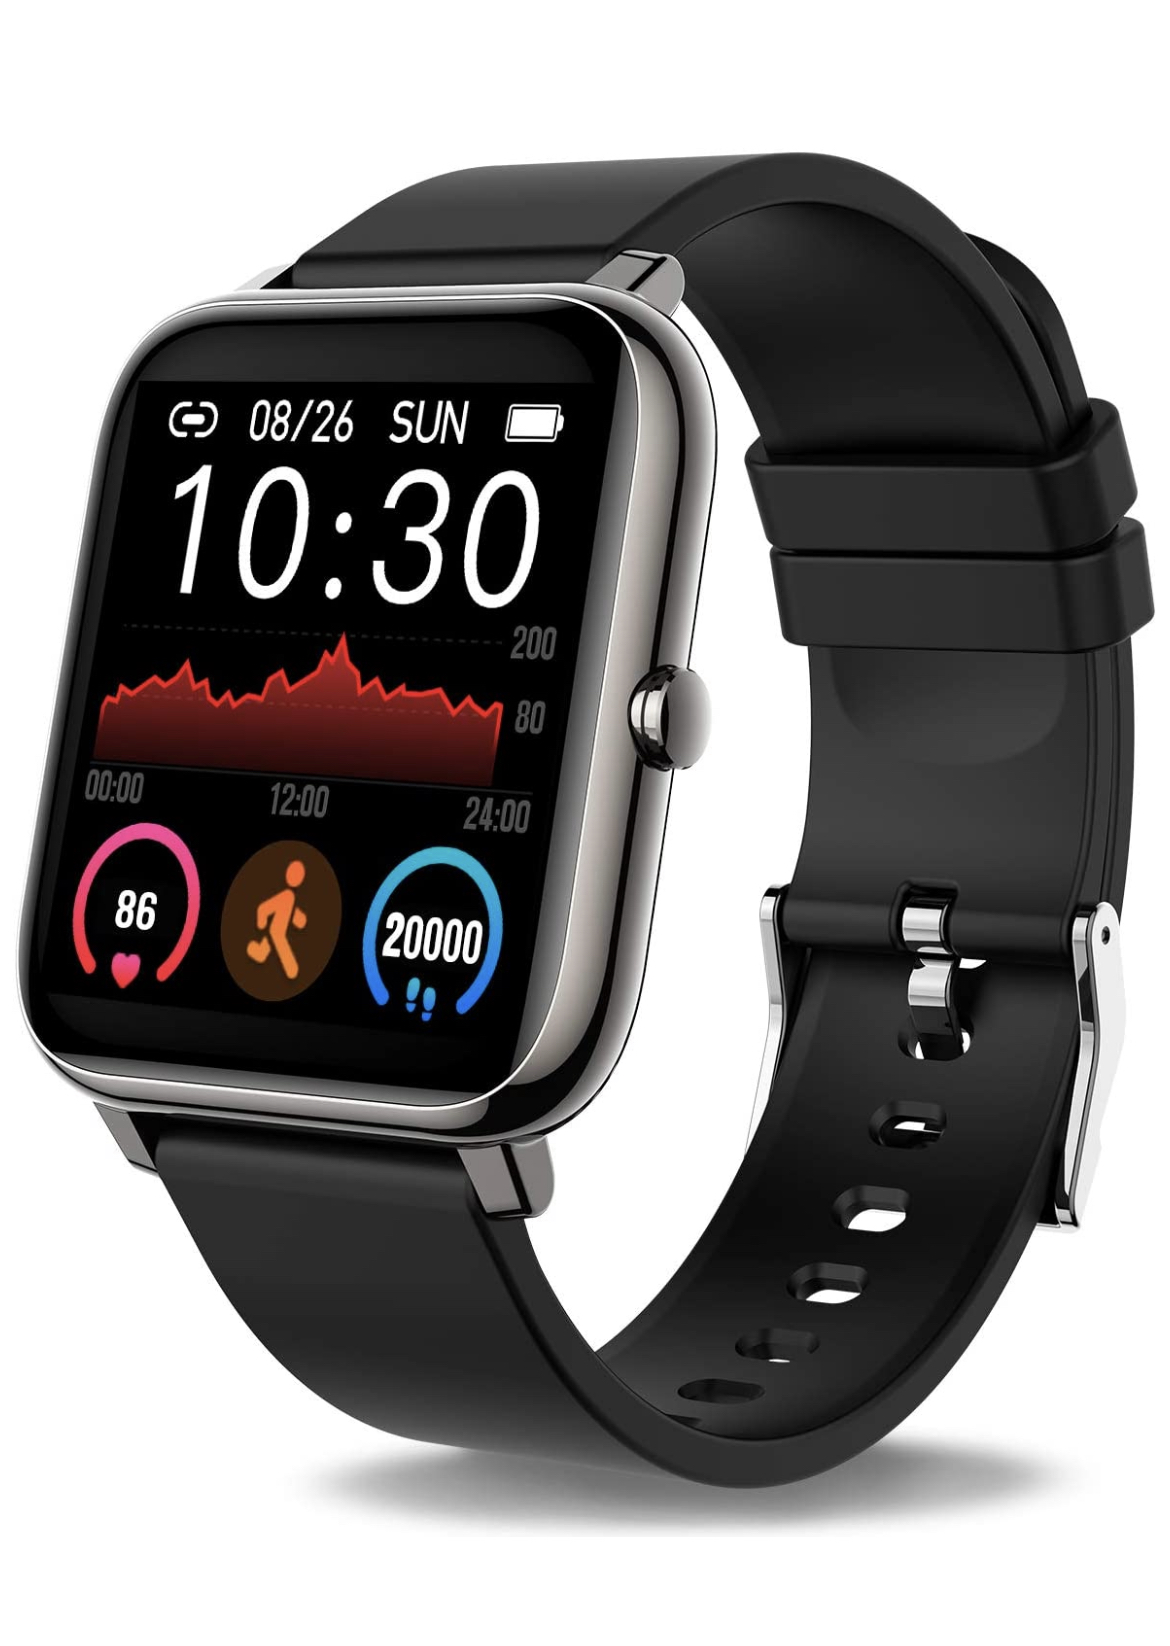 Donerton Smart Watch, Fitness Tracker 1.4 for Android Phones $23.64